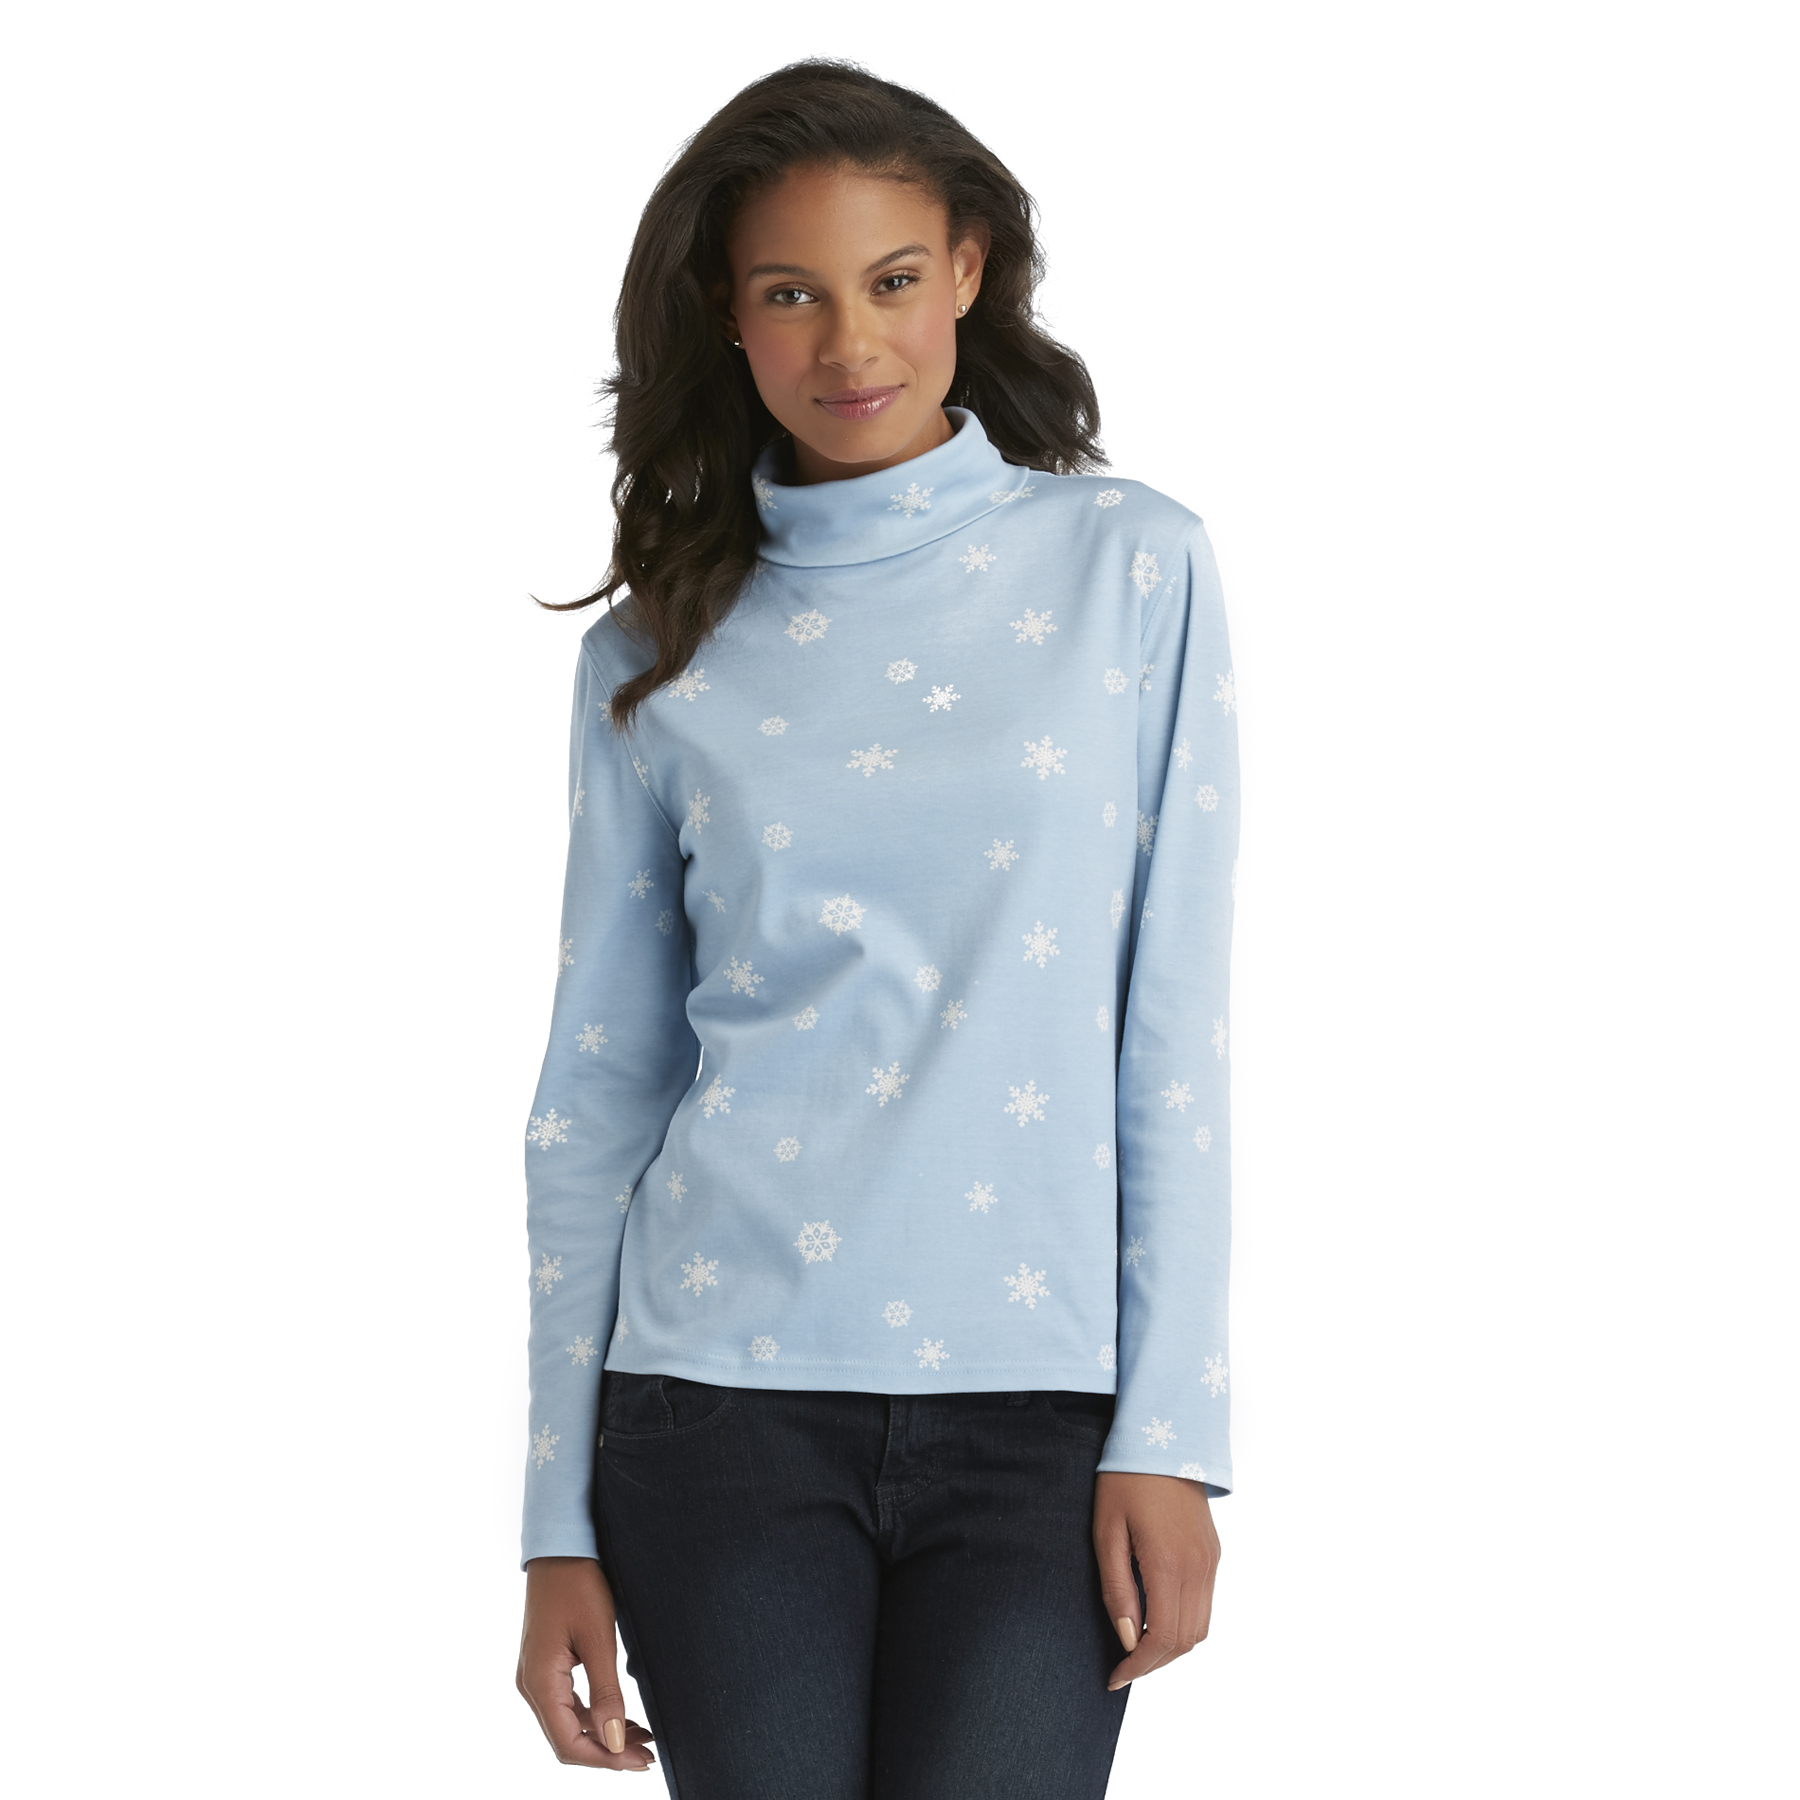 Holiday Editions Women's Turtleneck Top - Snowflake